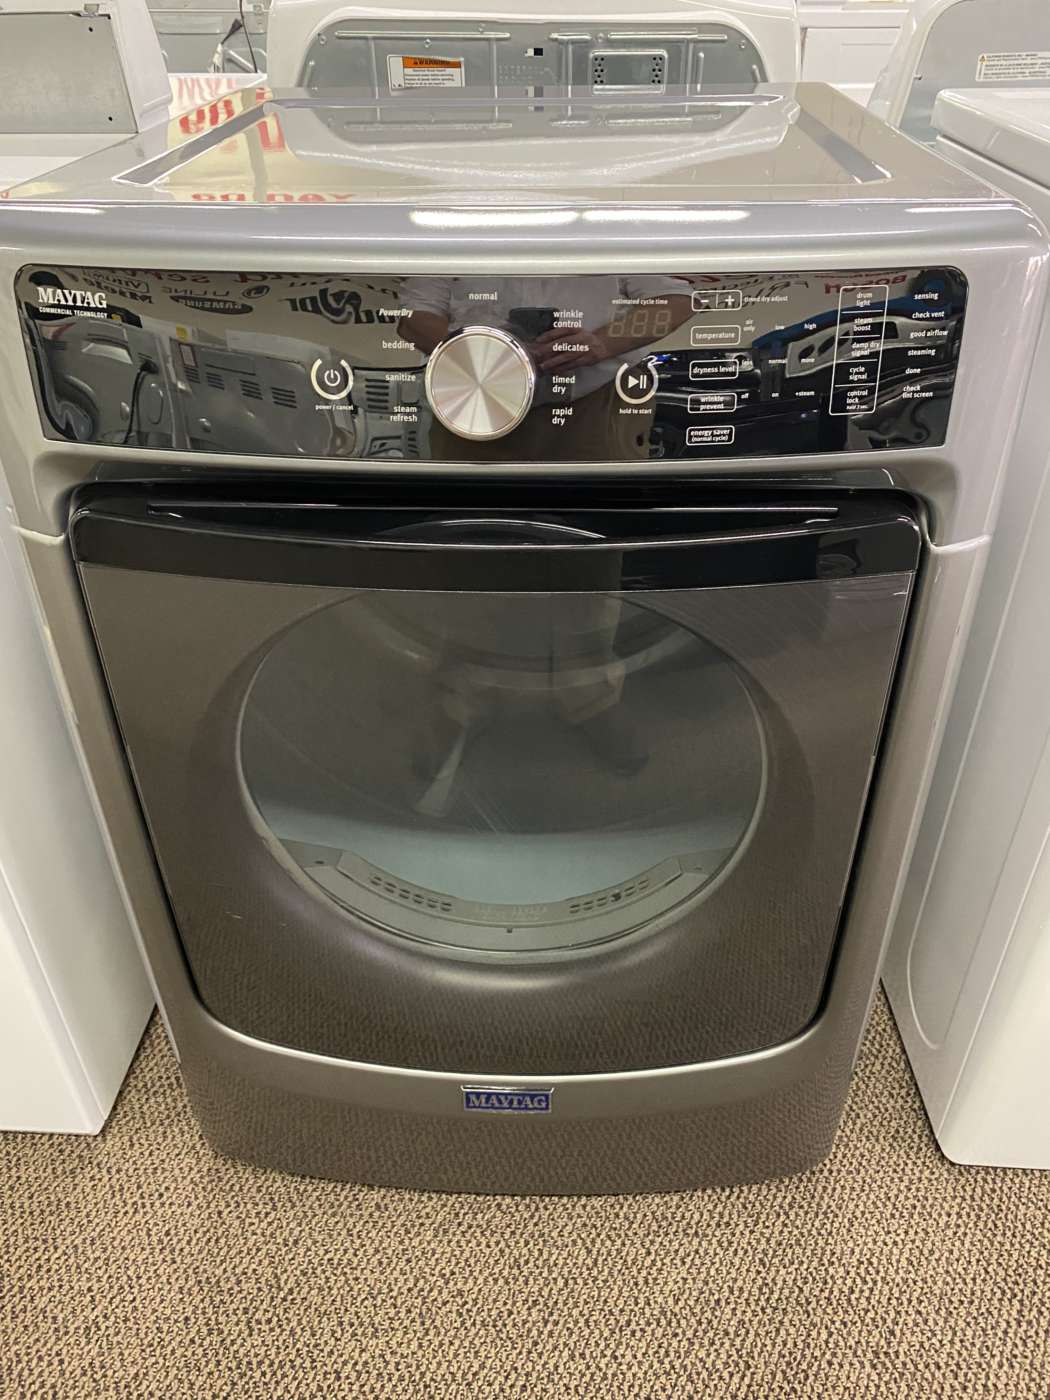 Reconditioned MAYTAG 7.4 Cu. Ft. Electric Dryer – Metallic Slate